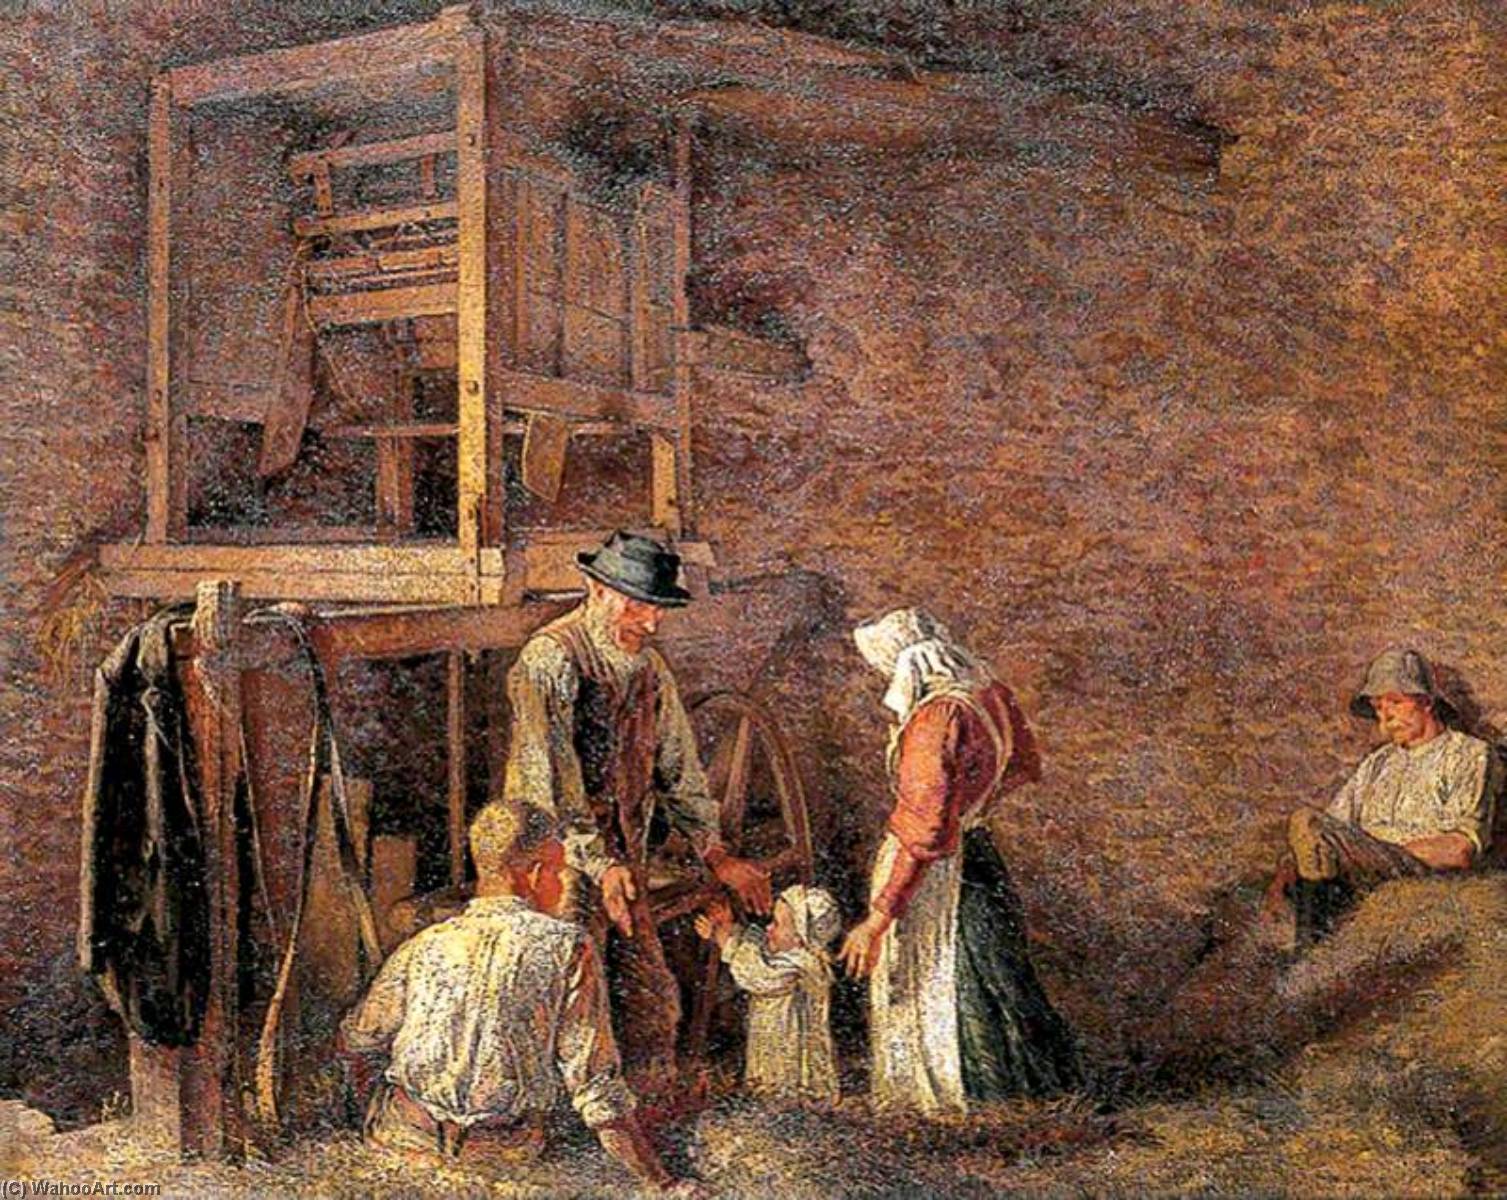 WikiOO.org - Güzel Sanatlar Ansiklopedisi - Resim, Resimler Maxwell Gordon Lightfoot - The Interior of a Barn, with Two Labourers Resting and an Old Man about to Embrace a Child Accompanied by a Woman